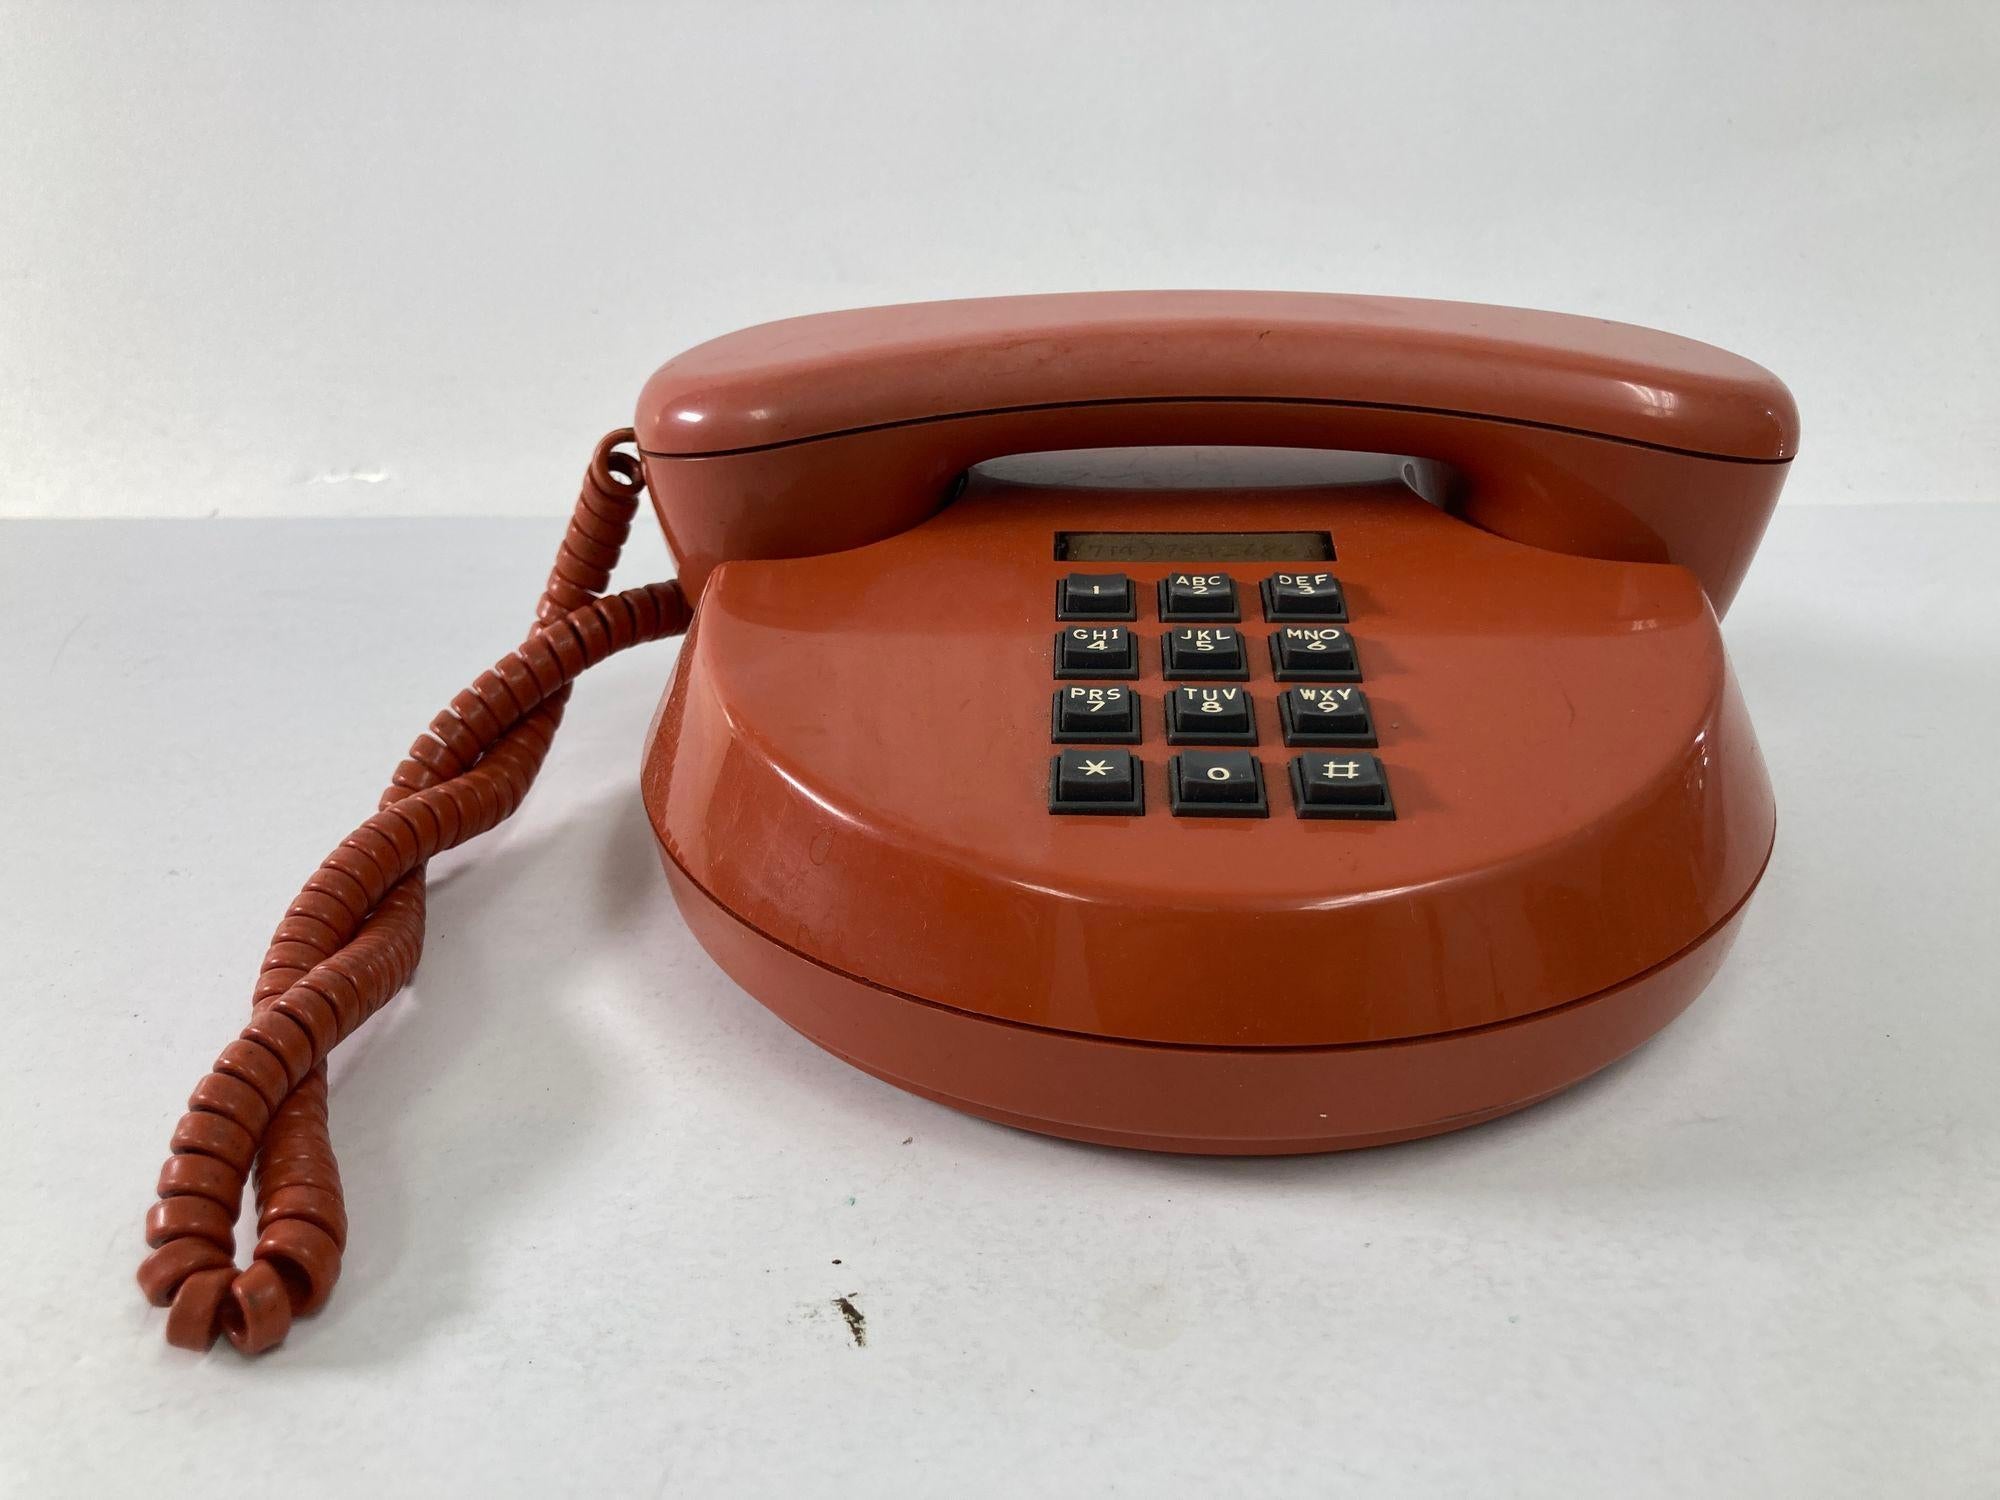 Vintage bakelite push-button round telephone in burnt orange color from 70s to 80s.
Vintage Telephone 1970s Round Push Button Northern Telecom Mod Retro.
Great collectible phone to add to your collection. Burnt orange, black buttons.
Made in